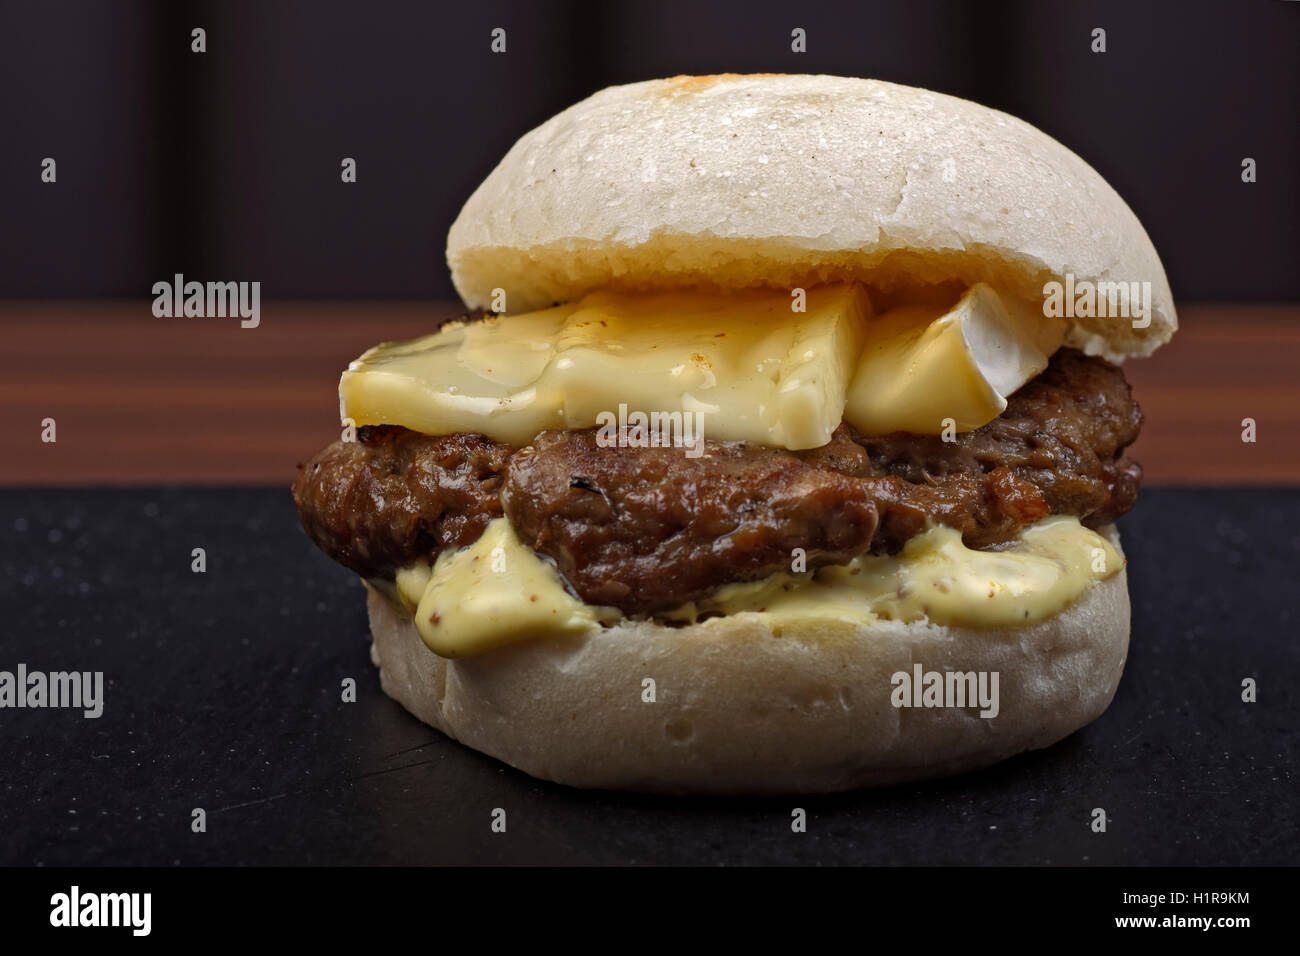 Hamburger with melted cheese. Stock Photo